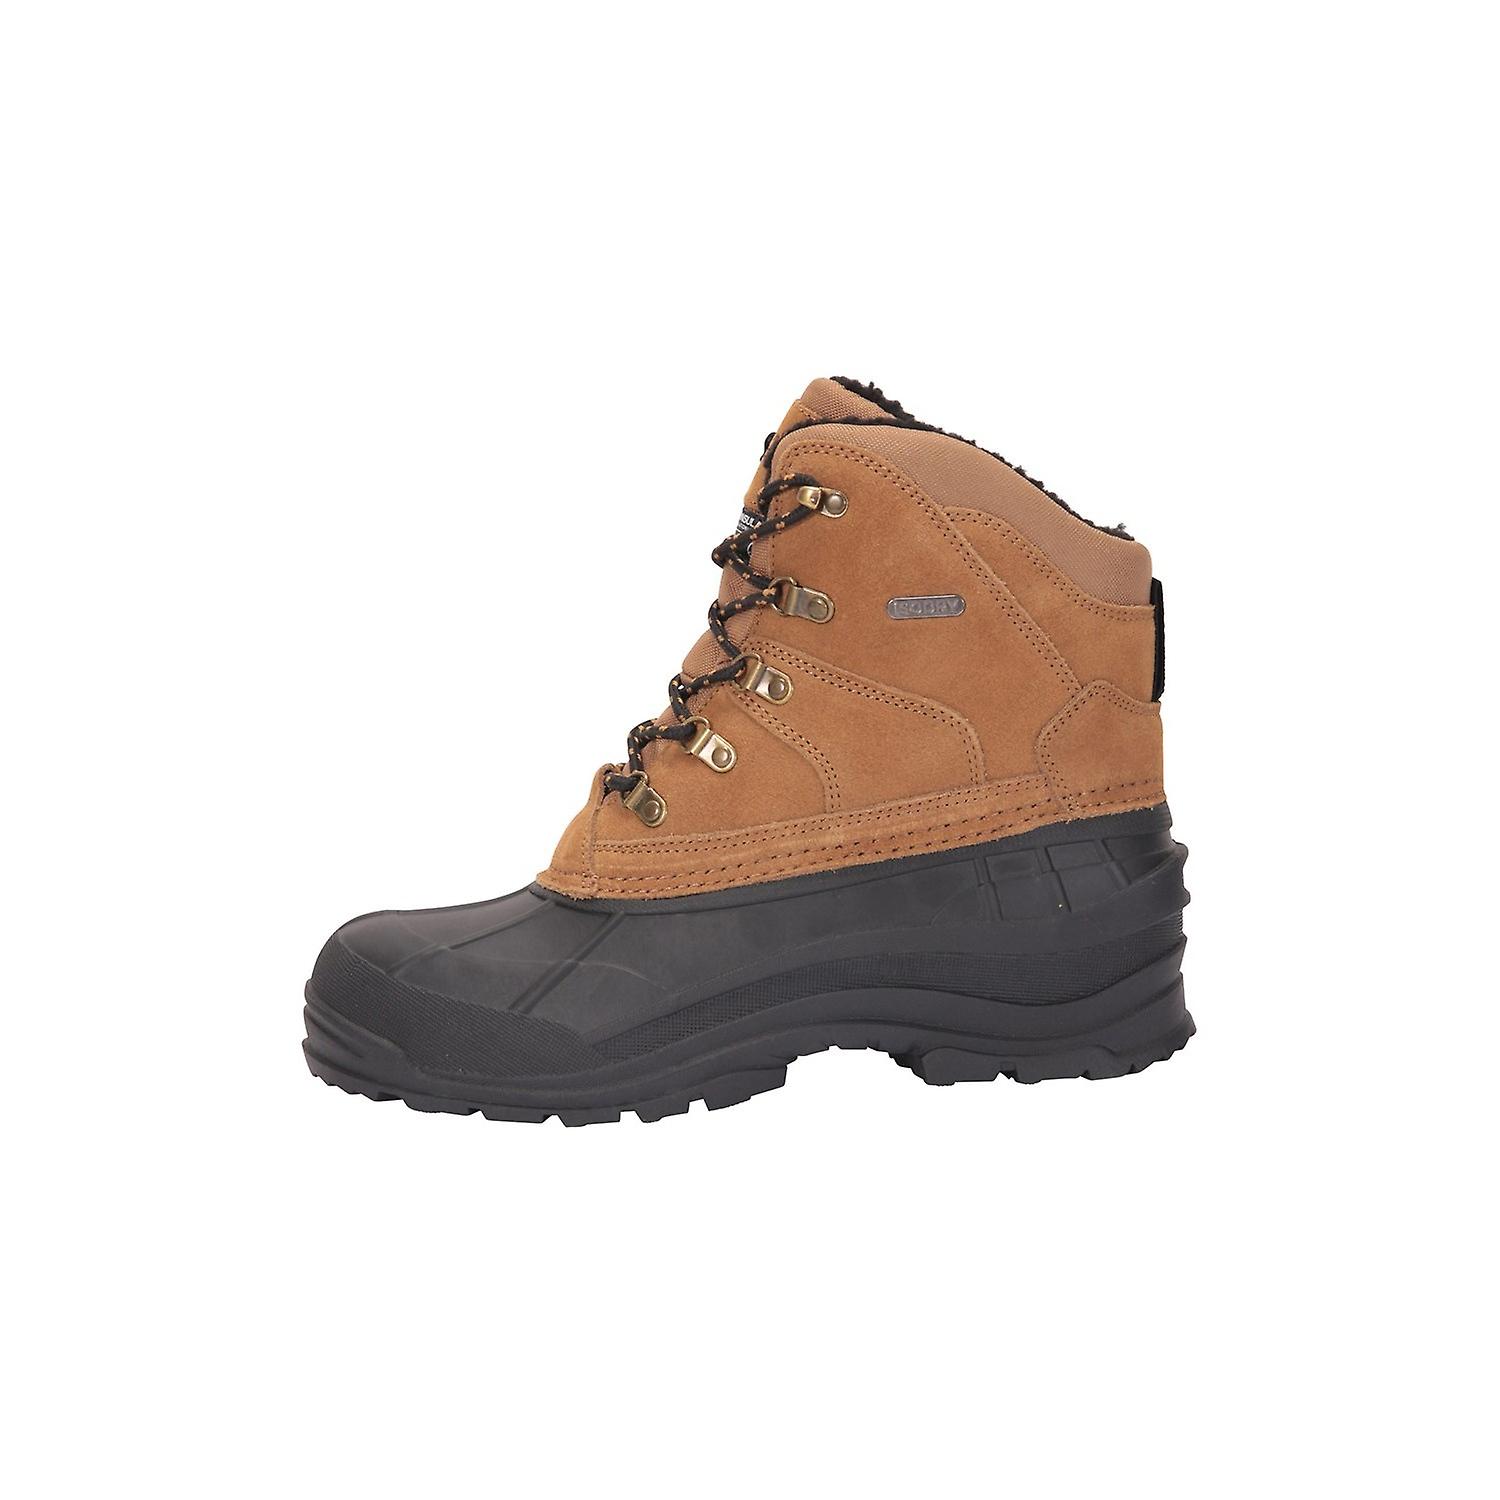 Mountain Warehouse Mens Range Cow Suede Snow Boots